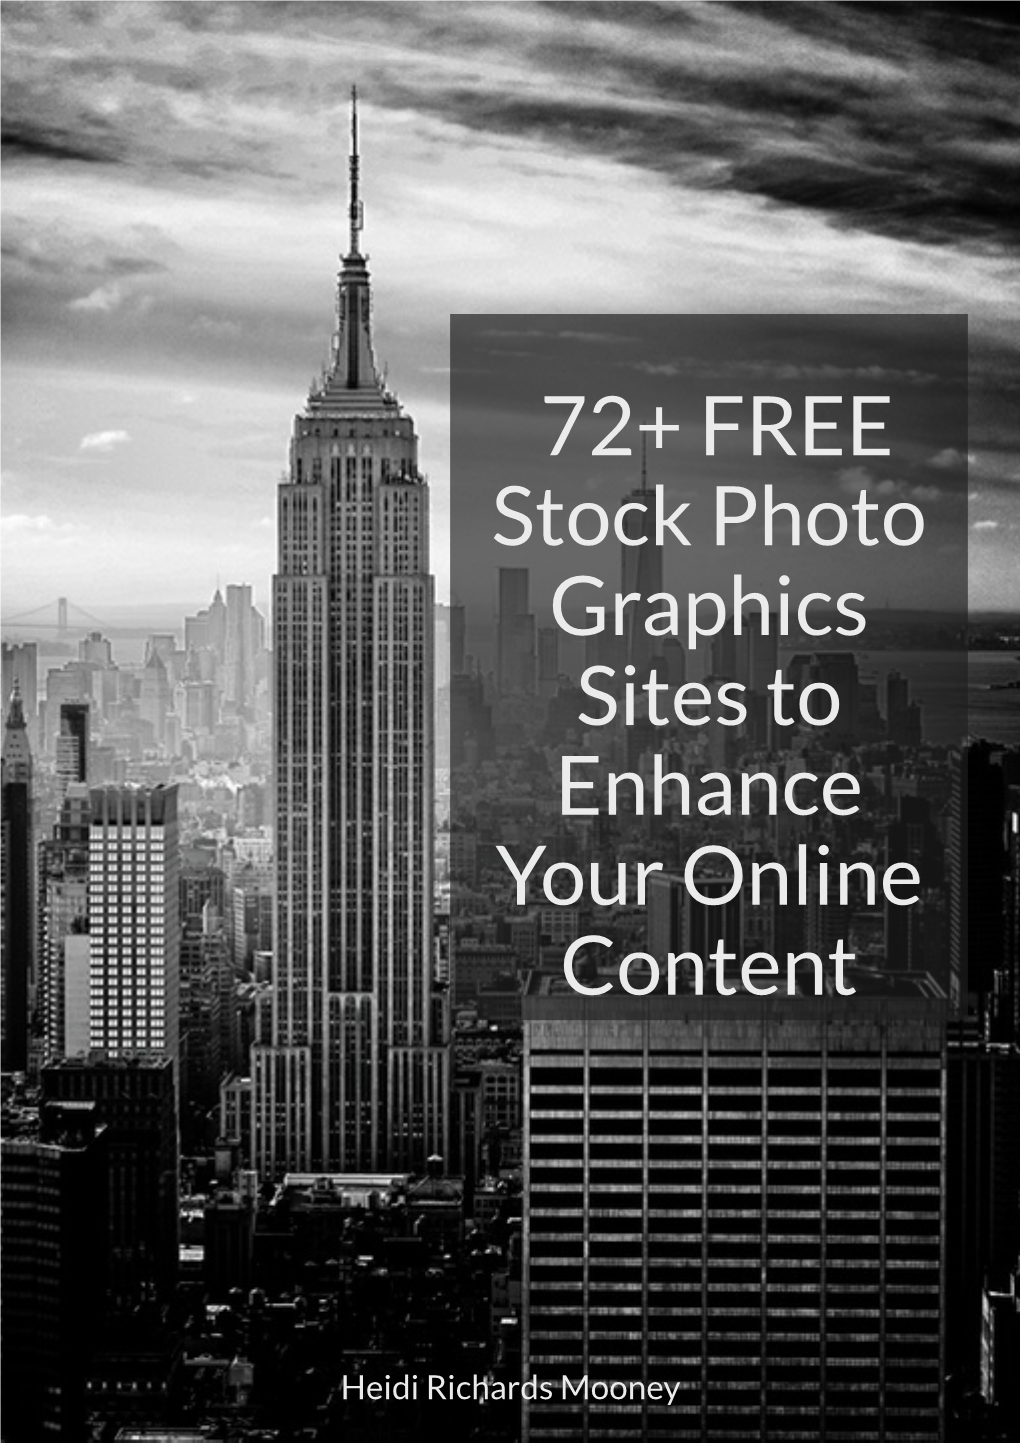 72+ FREE Stock Photo Graphics Sites to Enhance Your Online Content